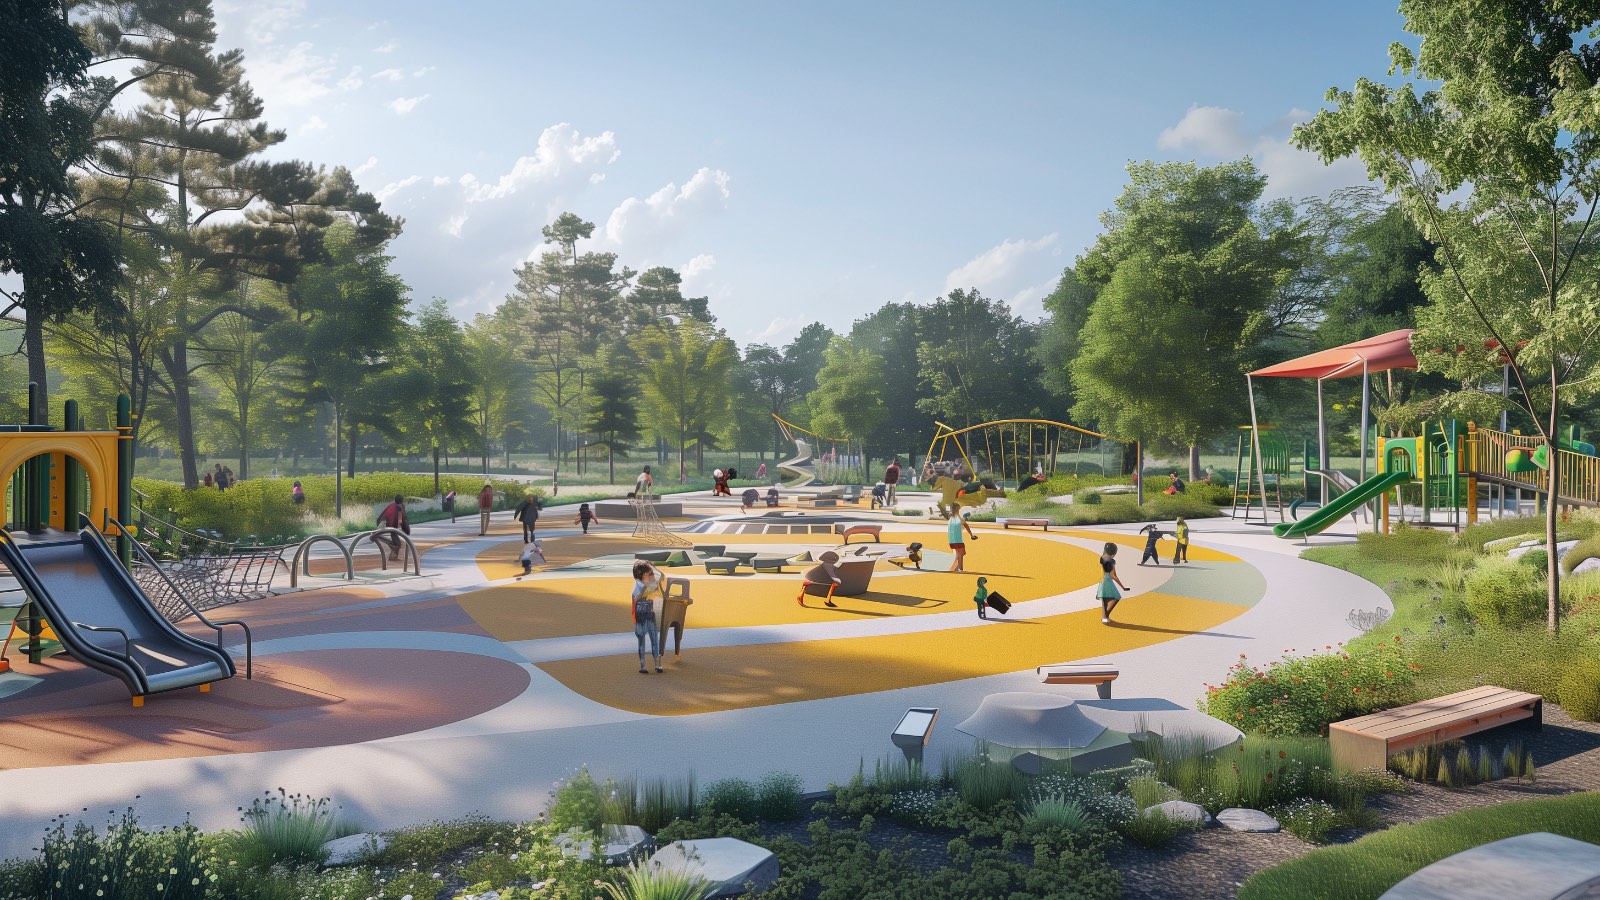 Ensuring Accessibility and Inclusivity in Playground Design